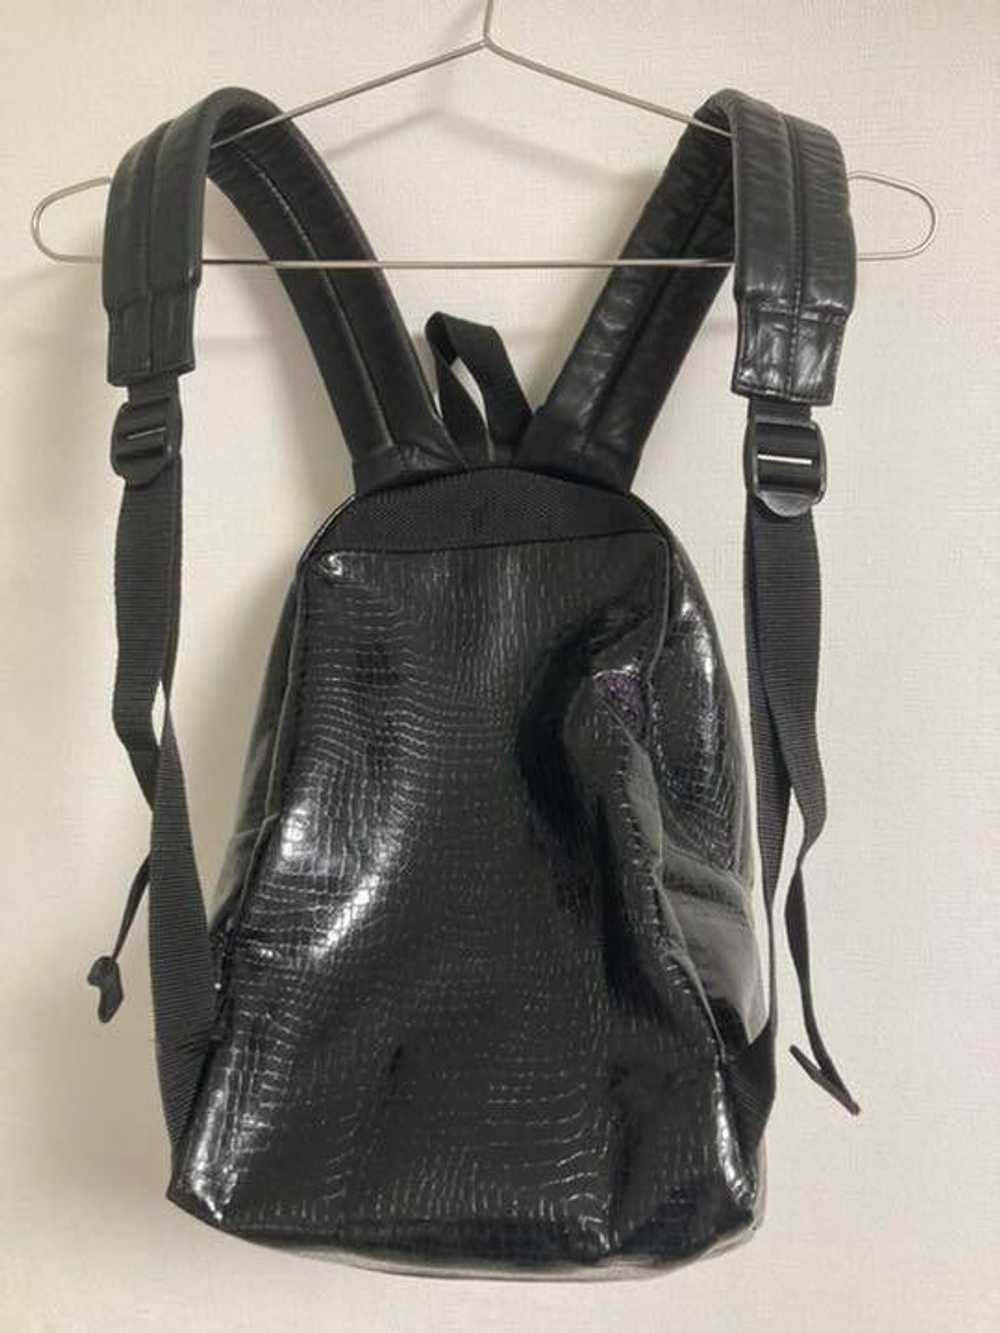 Comme des Garcons AW18 Mini Crocodile Backpack - image 2